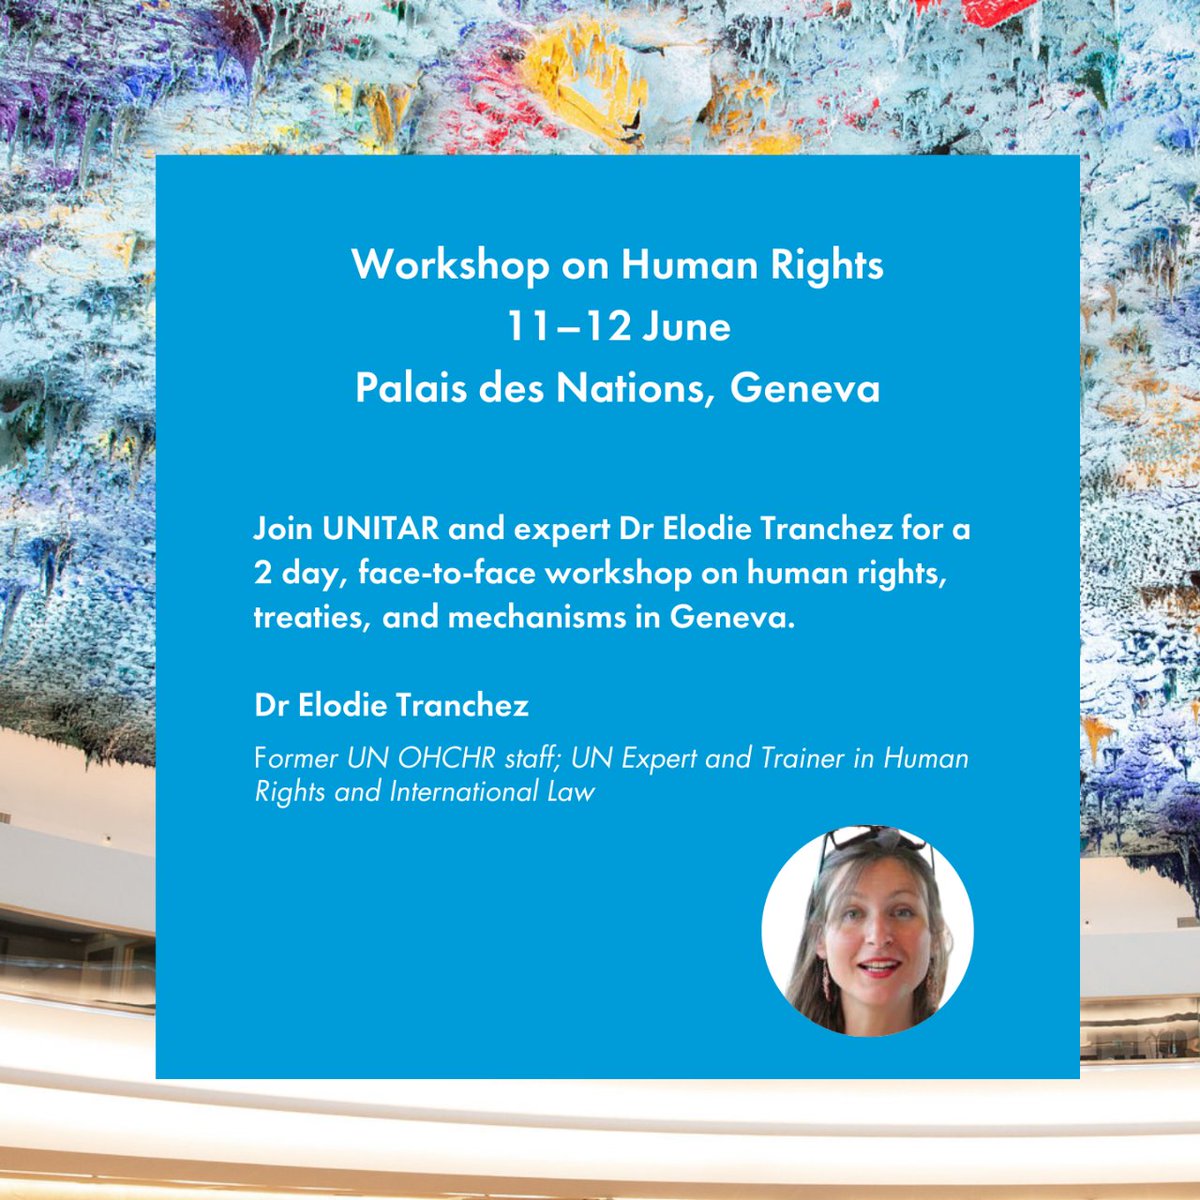 Apply for our face-to-face workshop on Human Rights, led by Dr Elodie Tranchez in Geneva, by 18 May: event.unitar.org/full-catalog/w…  #HumanRights #Geneva #UnitedNations